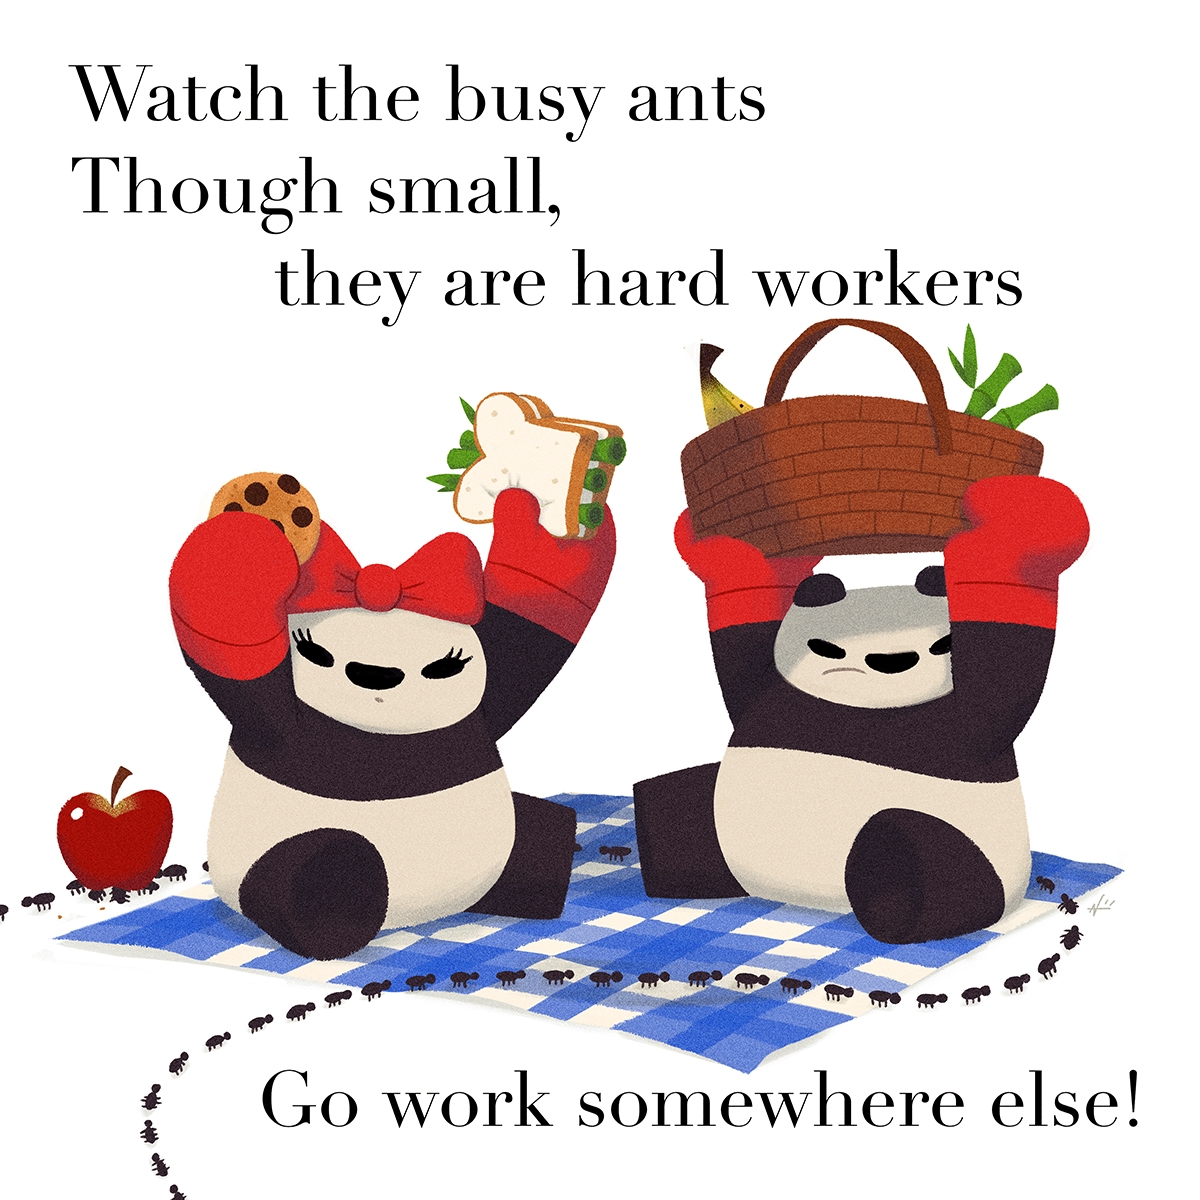 Watch the busy ants Though small, they are hard workers Go work somewhere else!